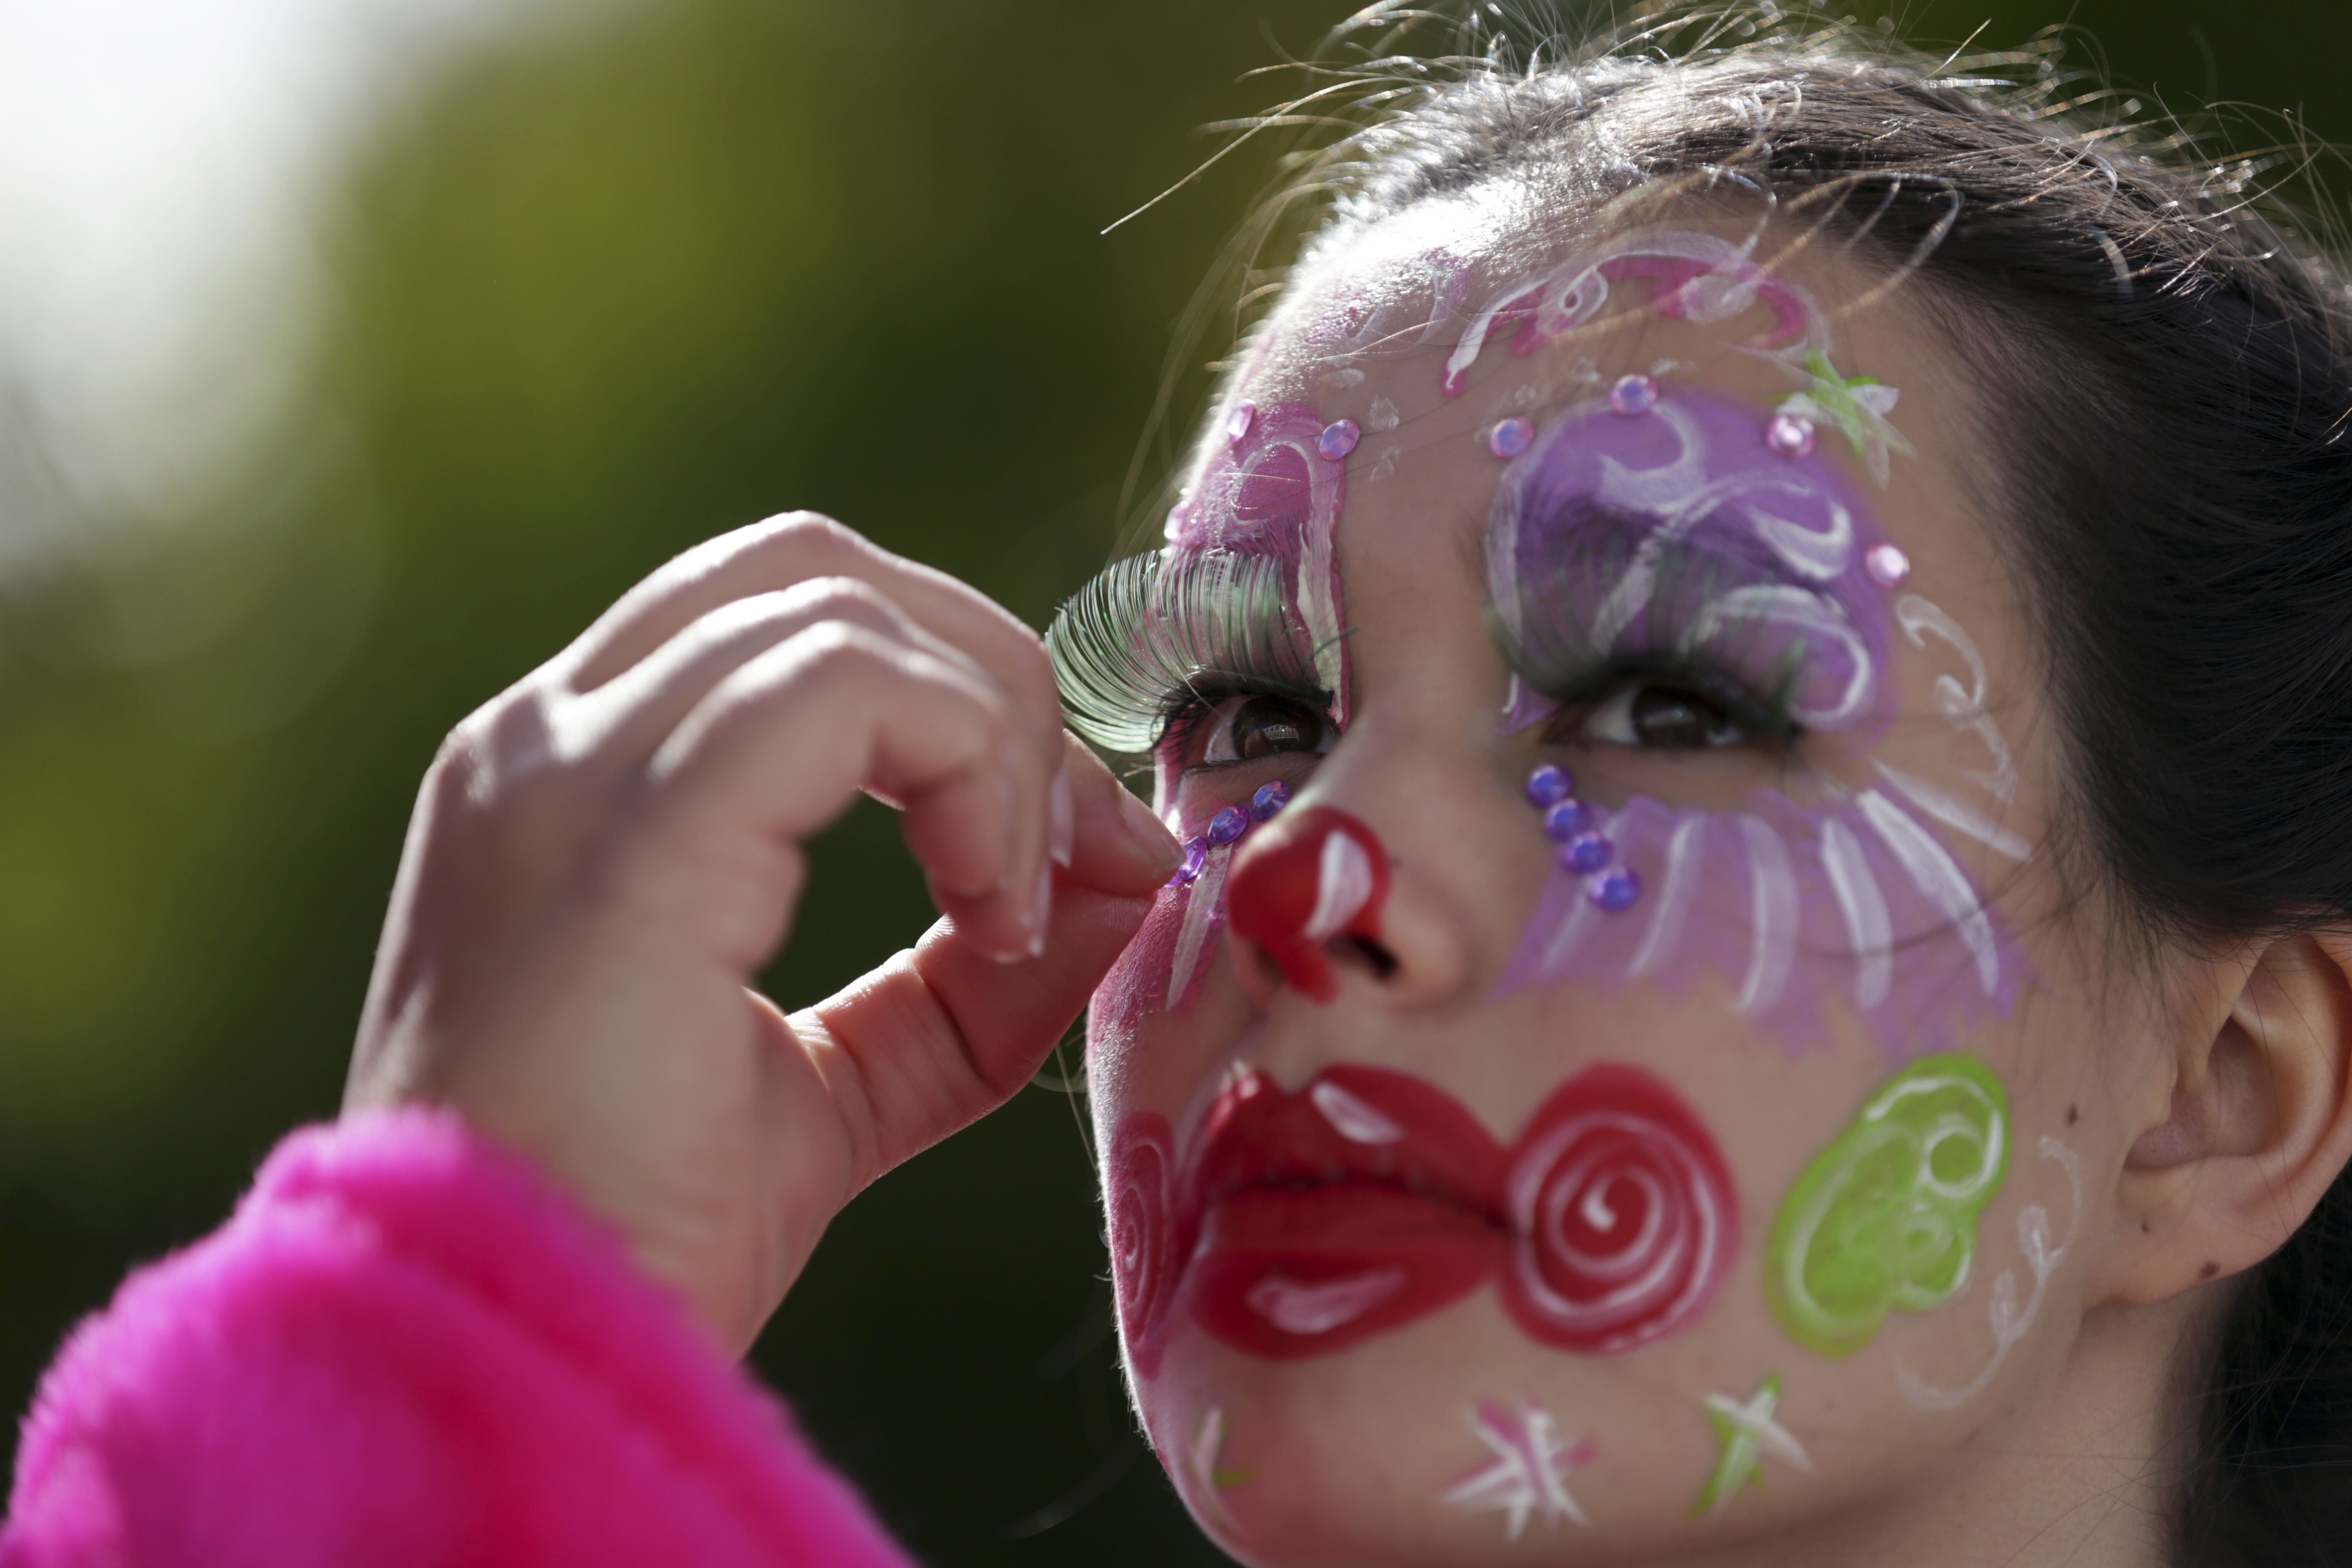 A girl gets makeup applied before taking part in the Carnival Clowns' Parade along the waterfront in Sesimbra, south of Lisbon, Monday, Feb. 12, 2018. Every year on Carnival Monday thousands dress as clowns to take part in the fishing town's parade. (AP Photo/Armando Franca)